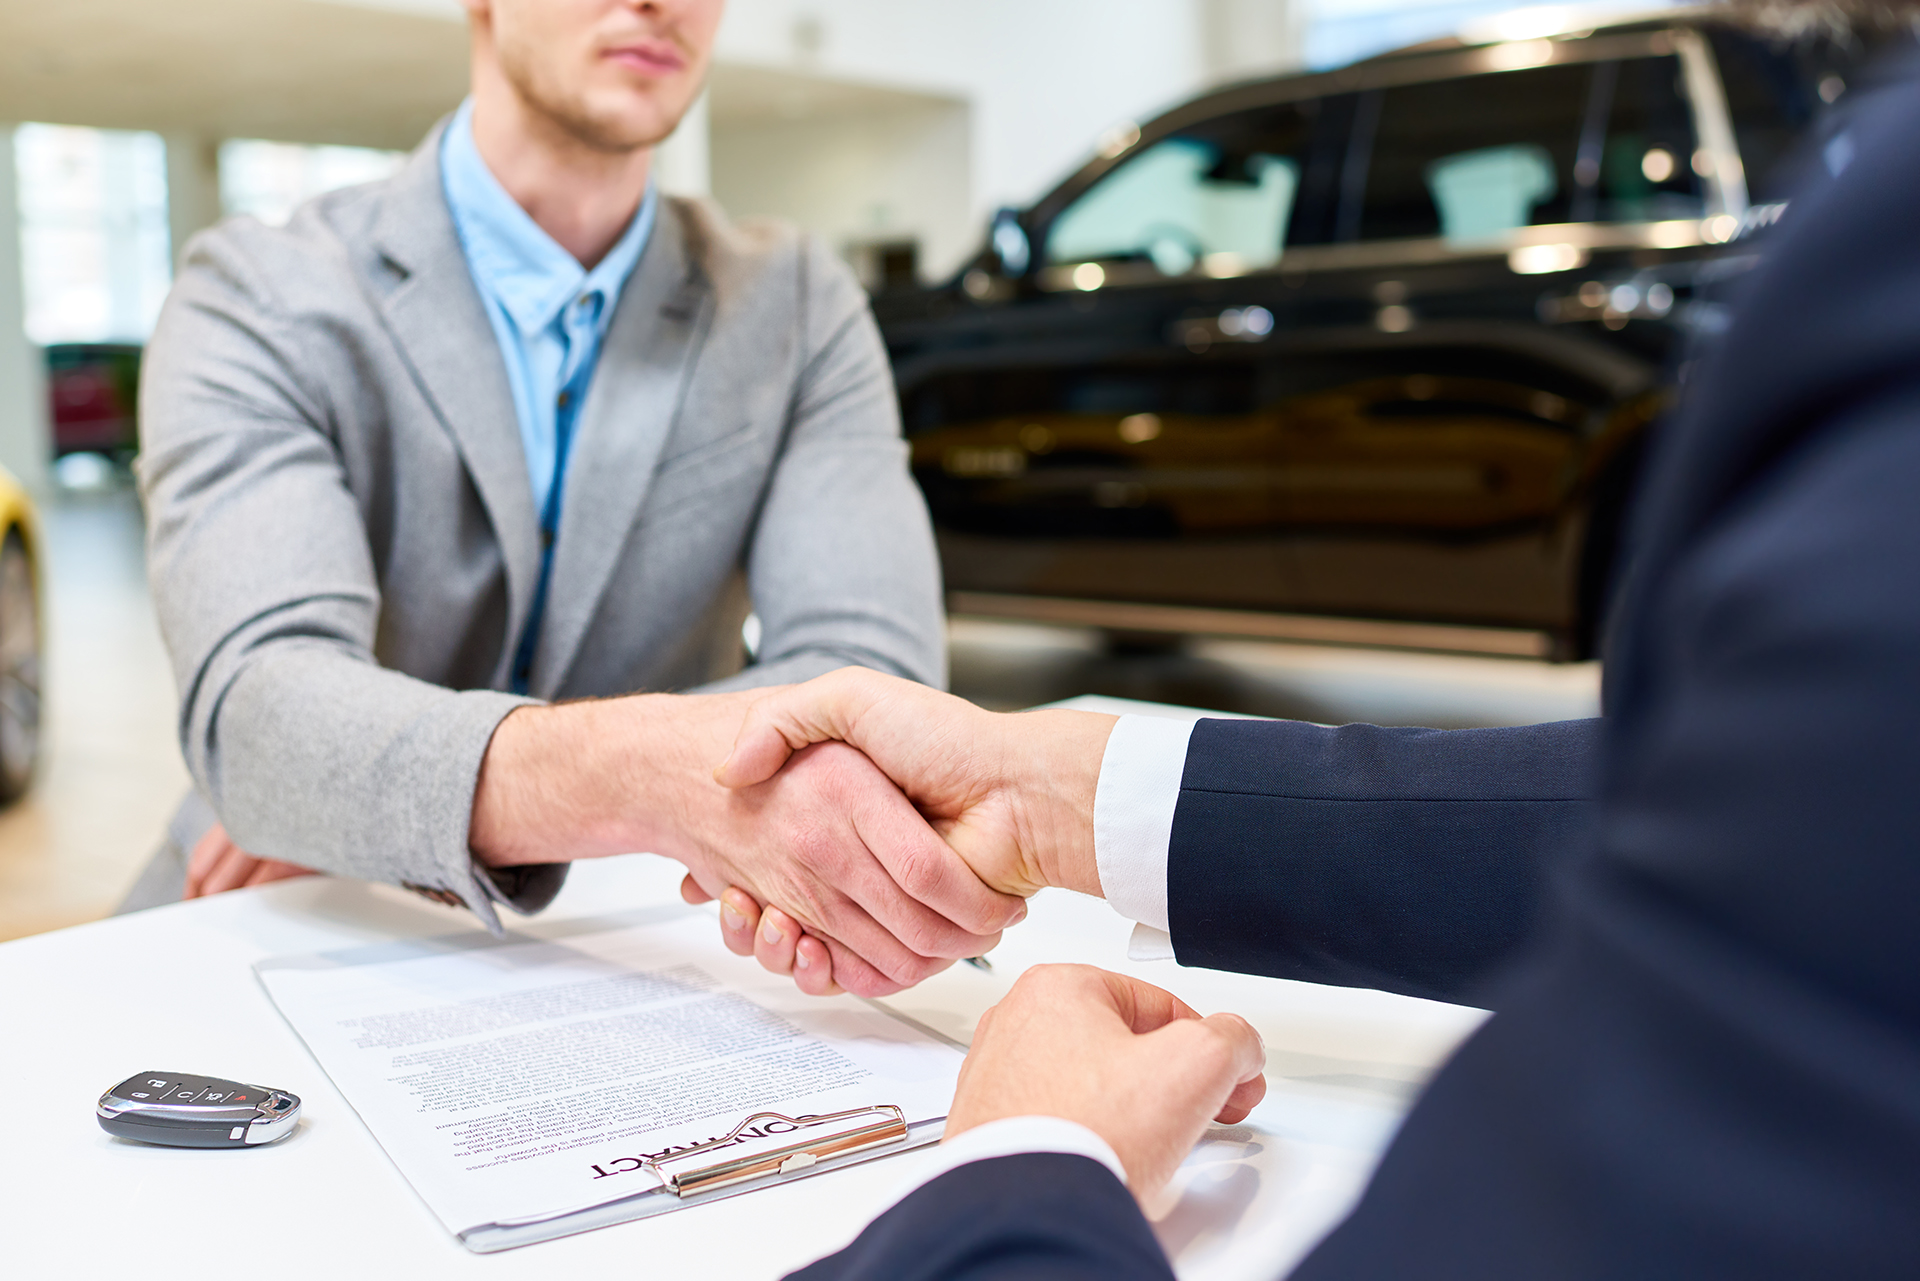 Gill Auto assists car dealership sellers